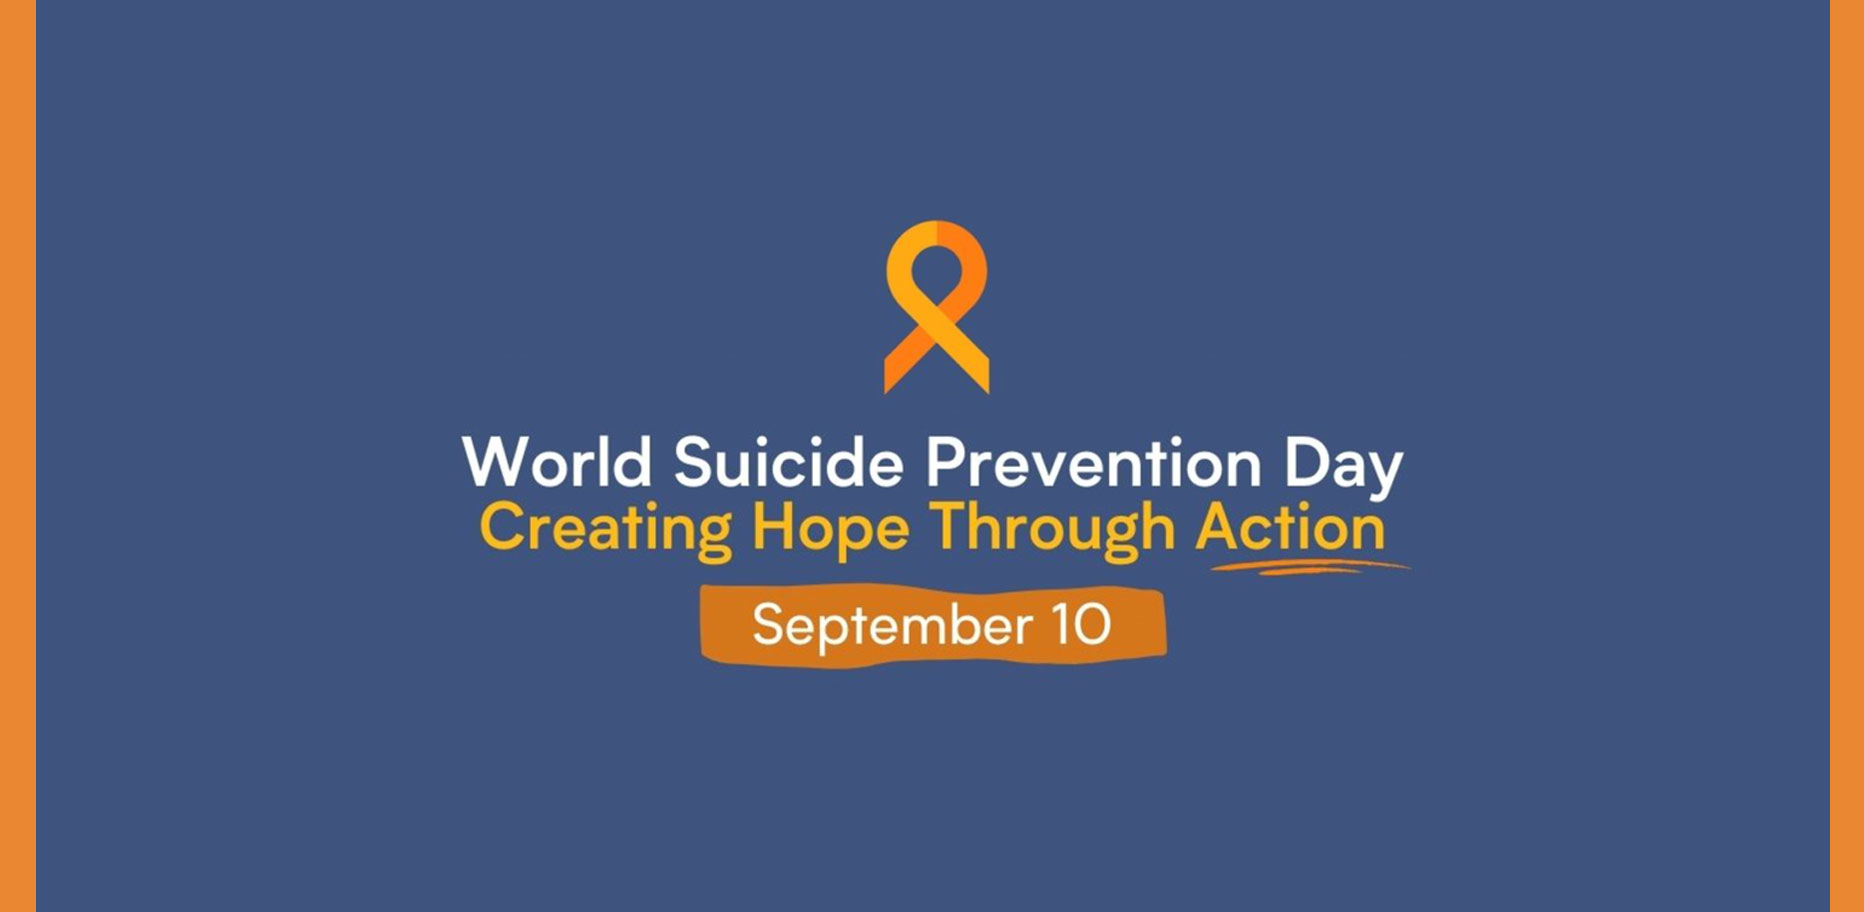 World Suicide Prevention Day 2021